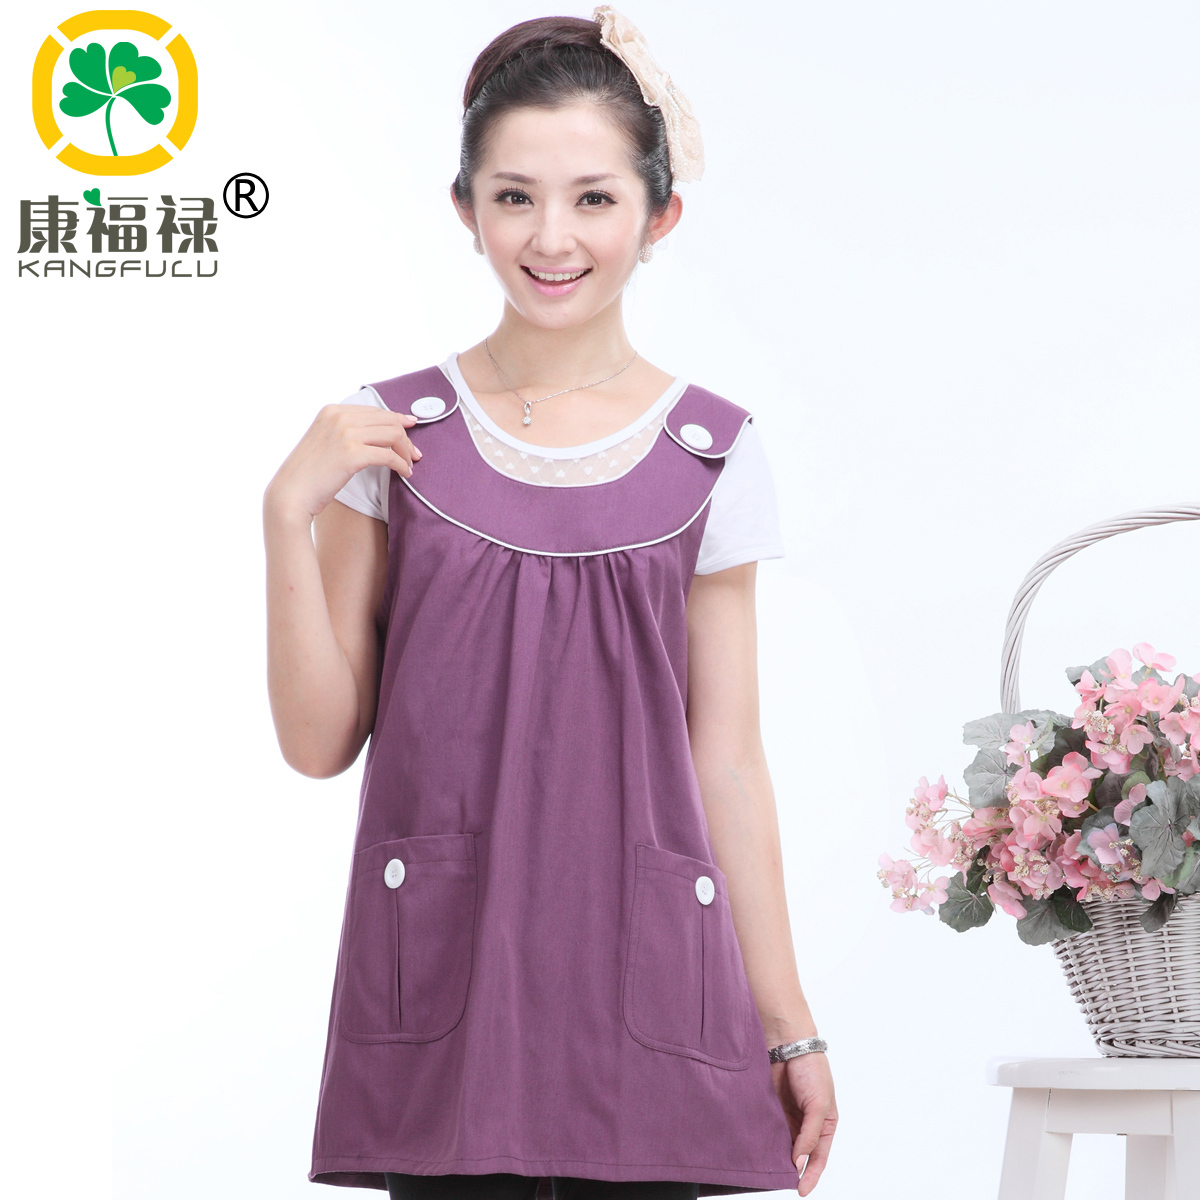 Radiation-resistant maternity clothing maternity radiation-resistant maternity clothing radiation-resistant clothes 804